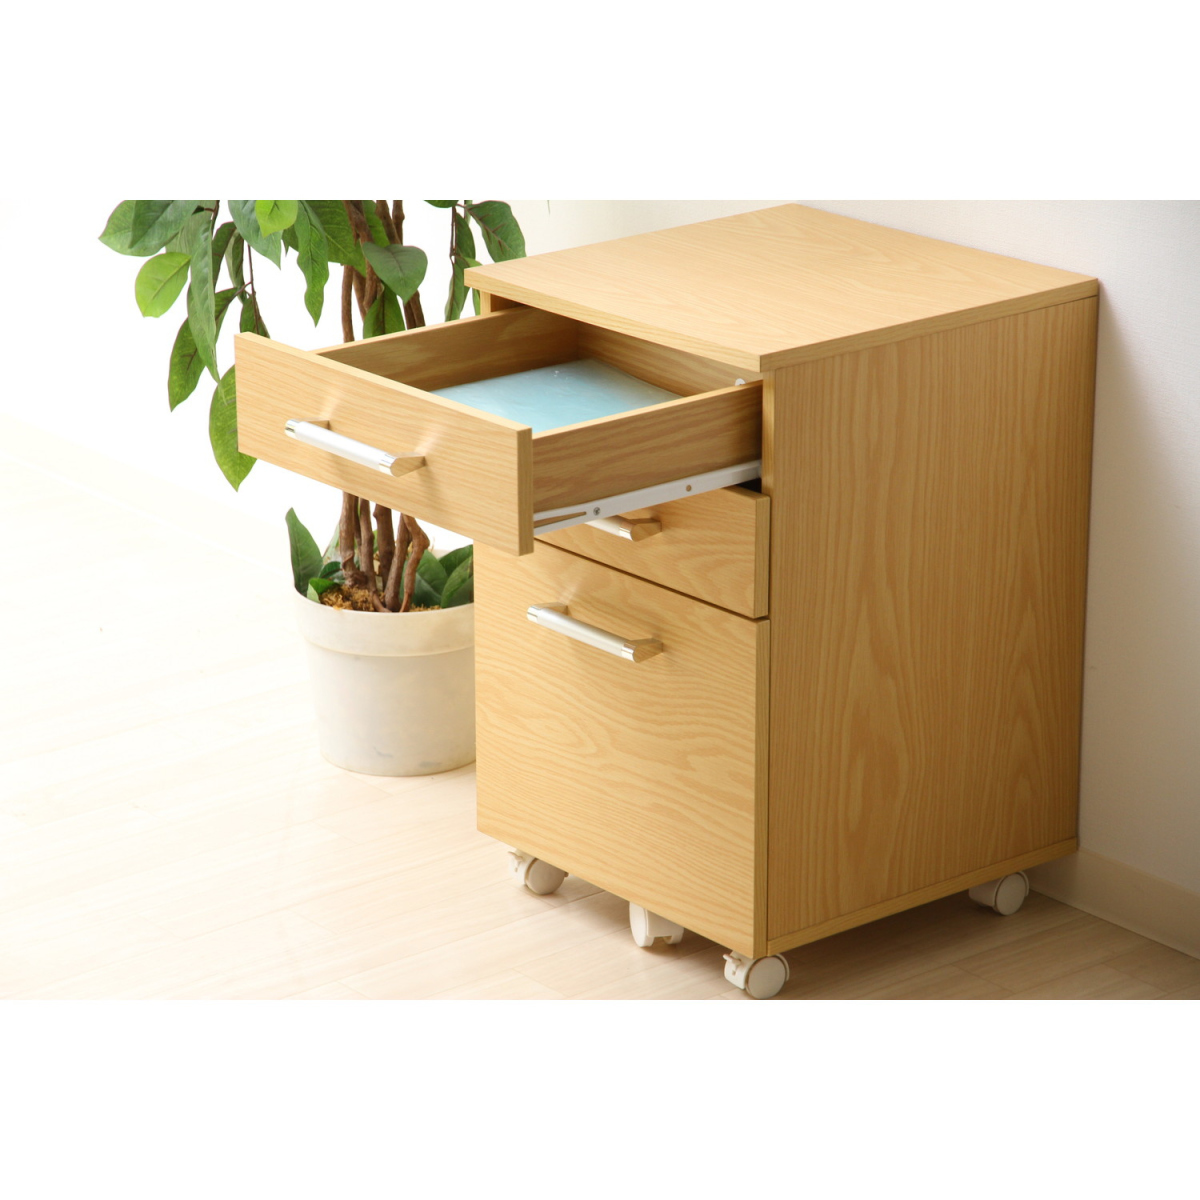  side chest drawer cabinet width 40cm depth 40cm height 60cm maple [ new goods ][ free shipping ]( Hokkaido Okinawa remote island postage separately )